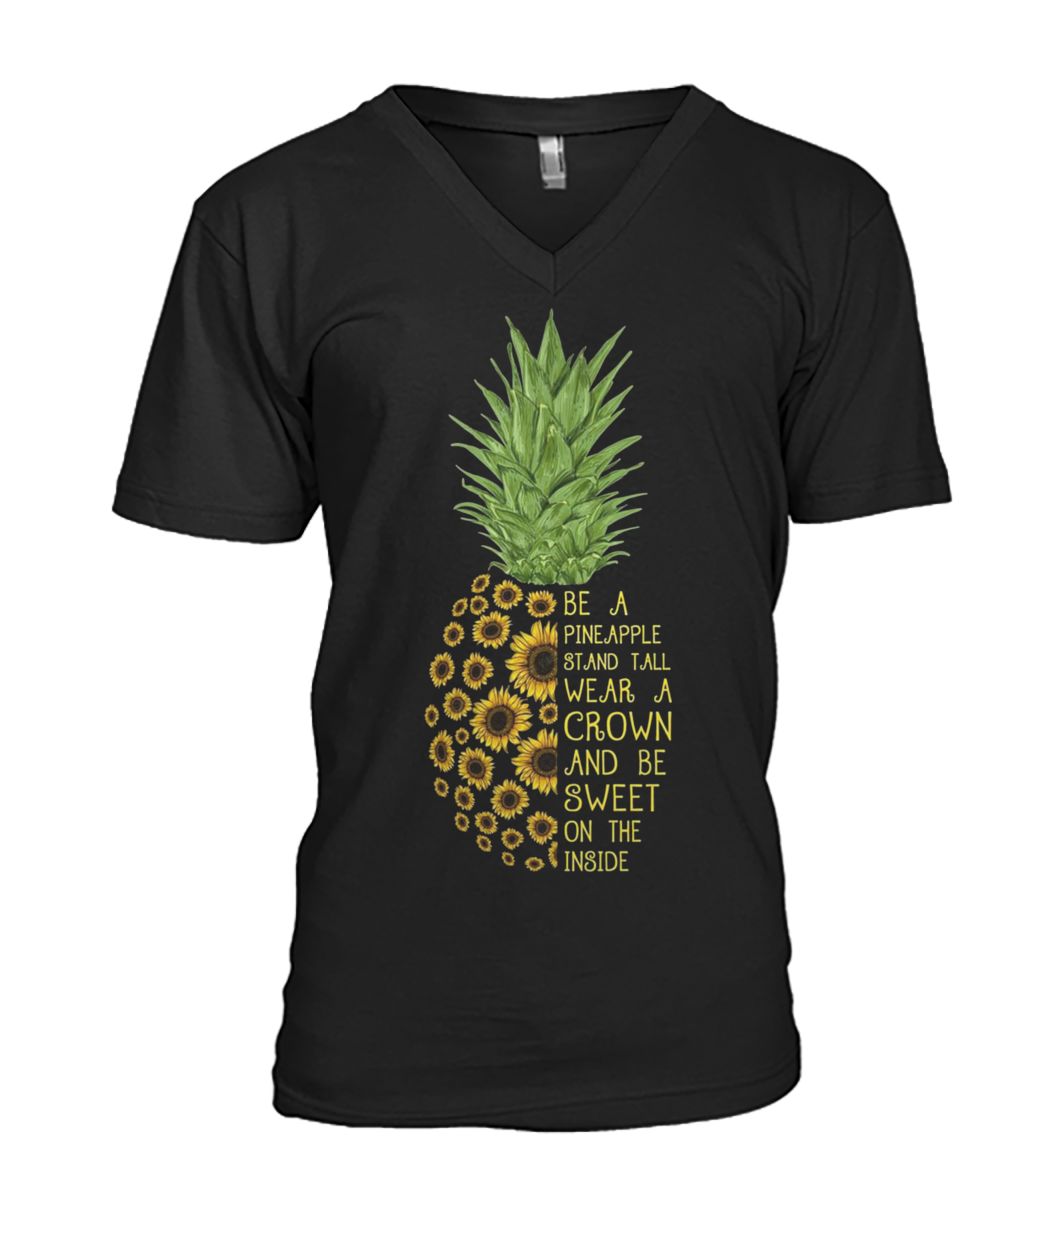 Sunflower be a pineapple stand tall wear a crown and be sweet on the inside mens v-neck